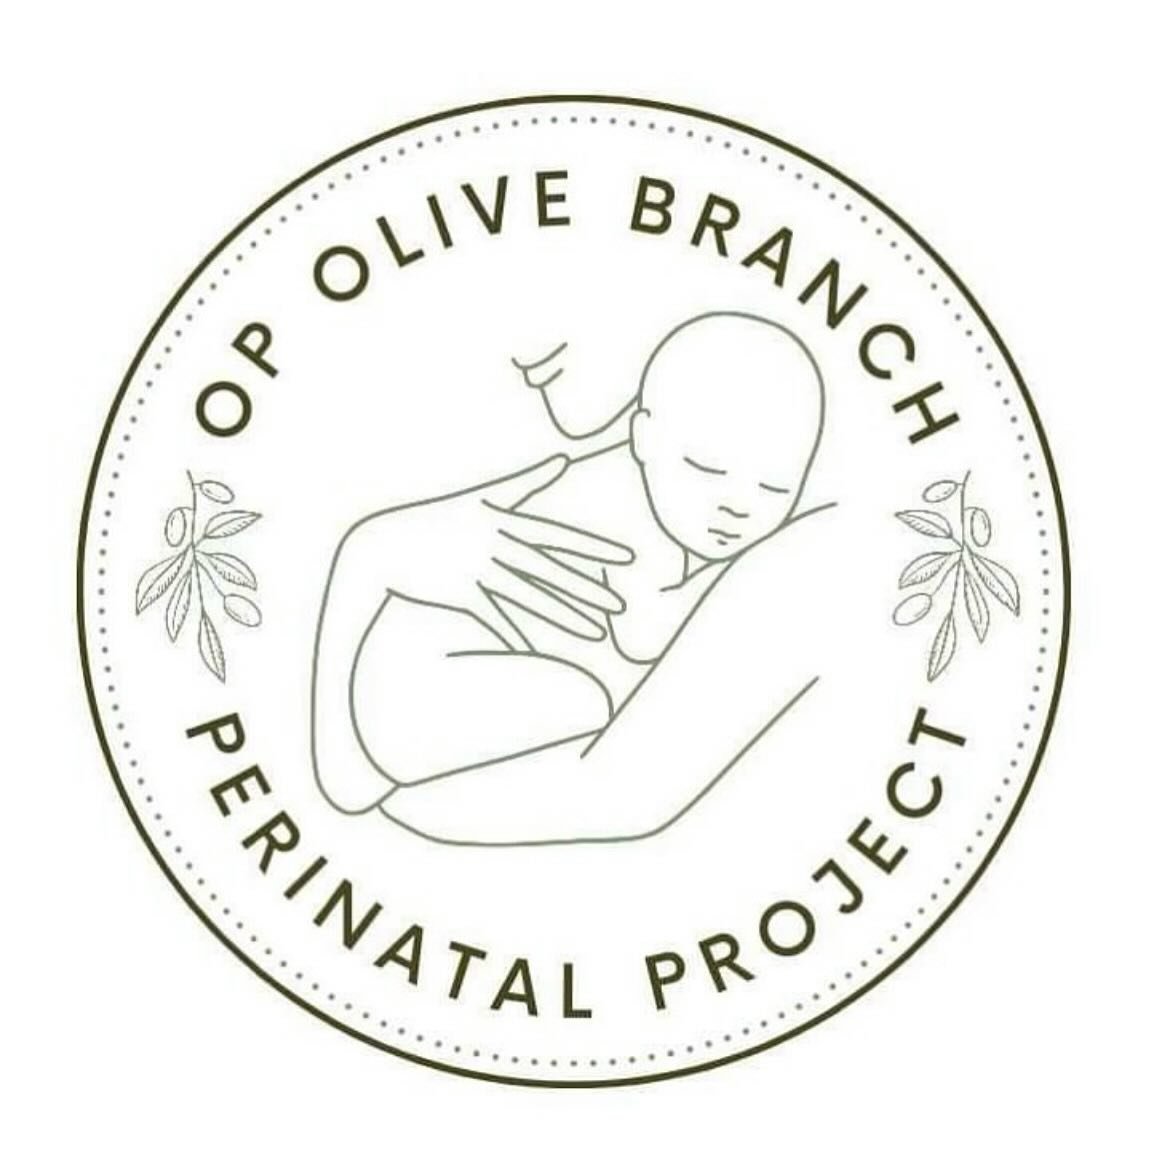 Operation Olive Branch Perinatal Project is a grassroots birth work project connecting families to essential prenatal care in 🍉 @oobperinatalproject. @angelagarbes inspired me (always) to share this fundraiser 💖 if you donate this weekend and share